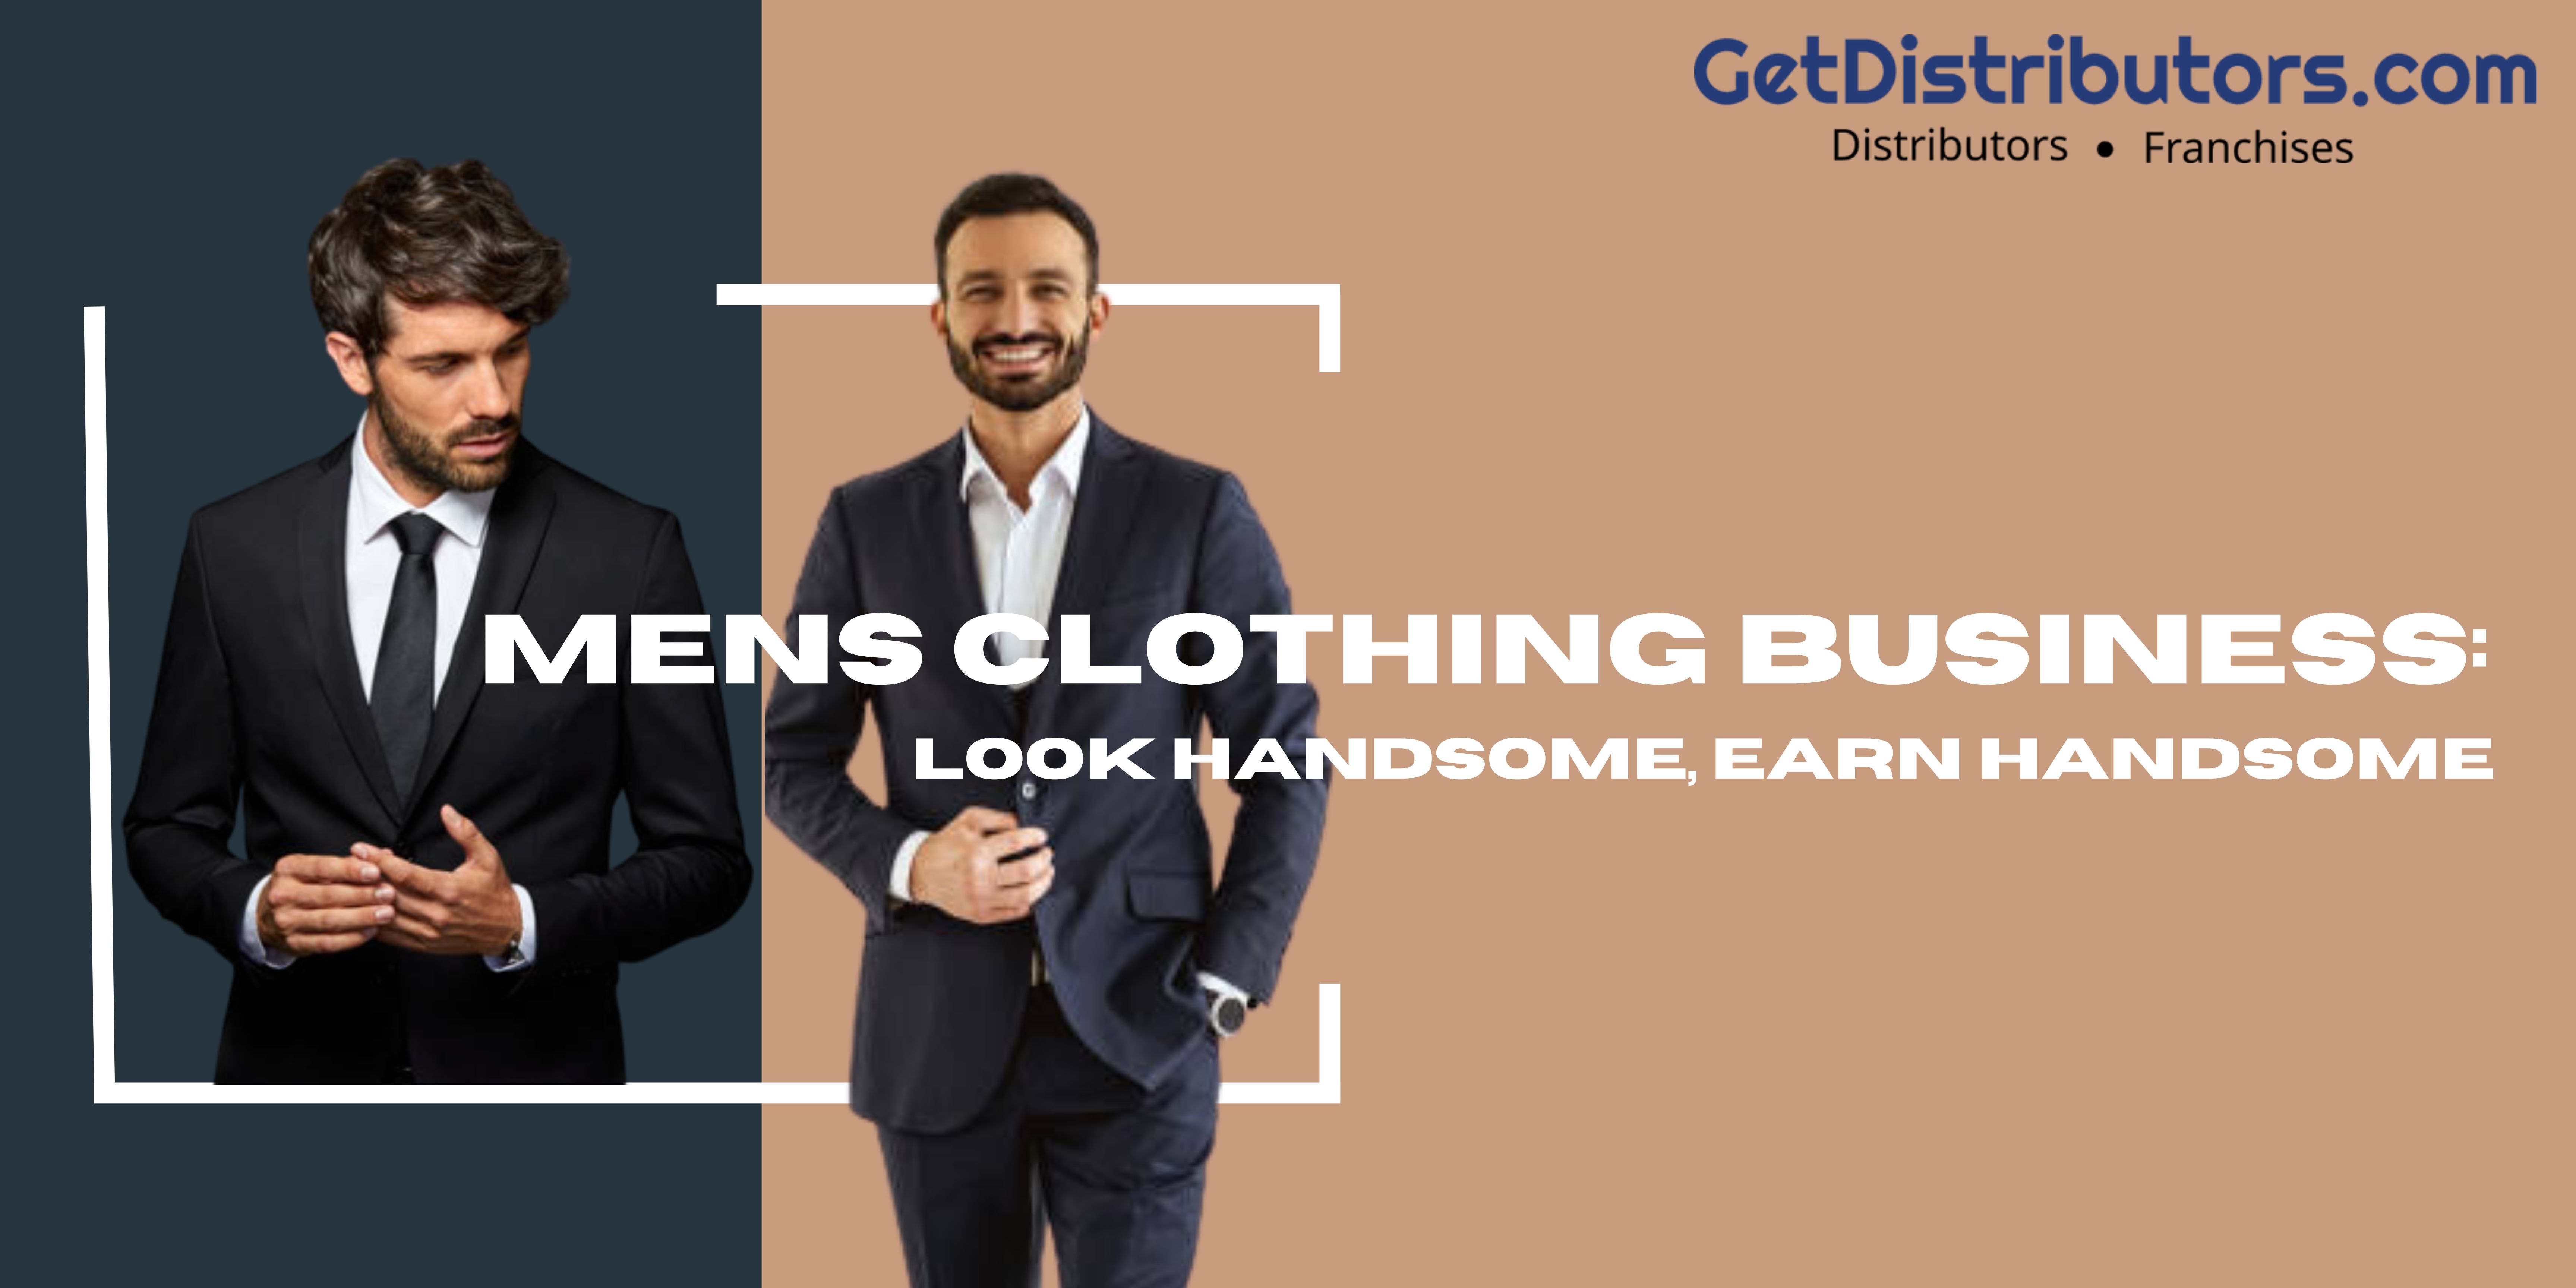 Mens Clothing Business Look Handsome, Earn Handsome